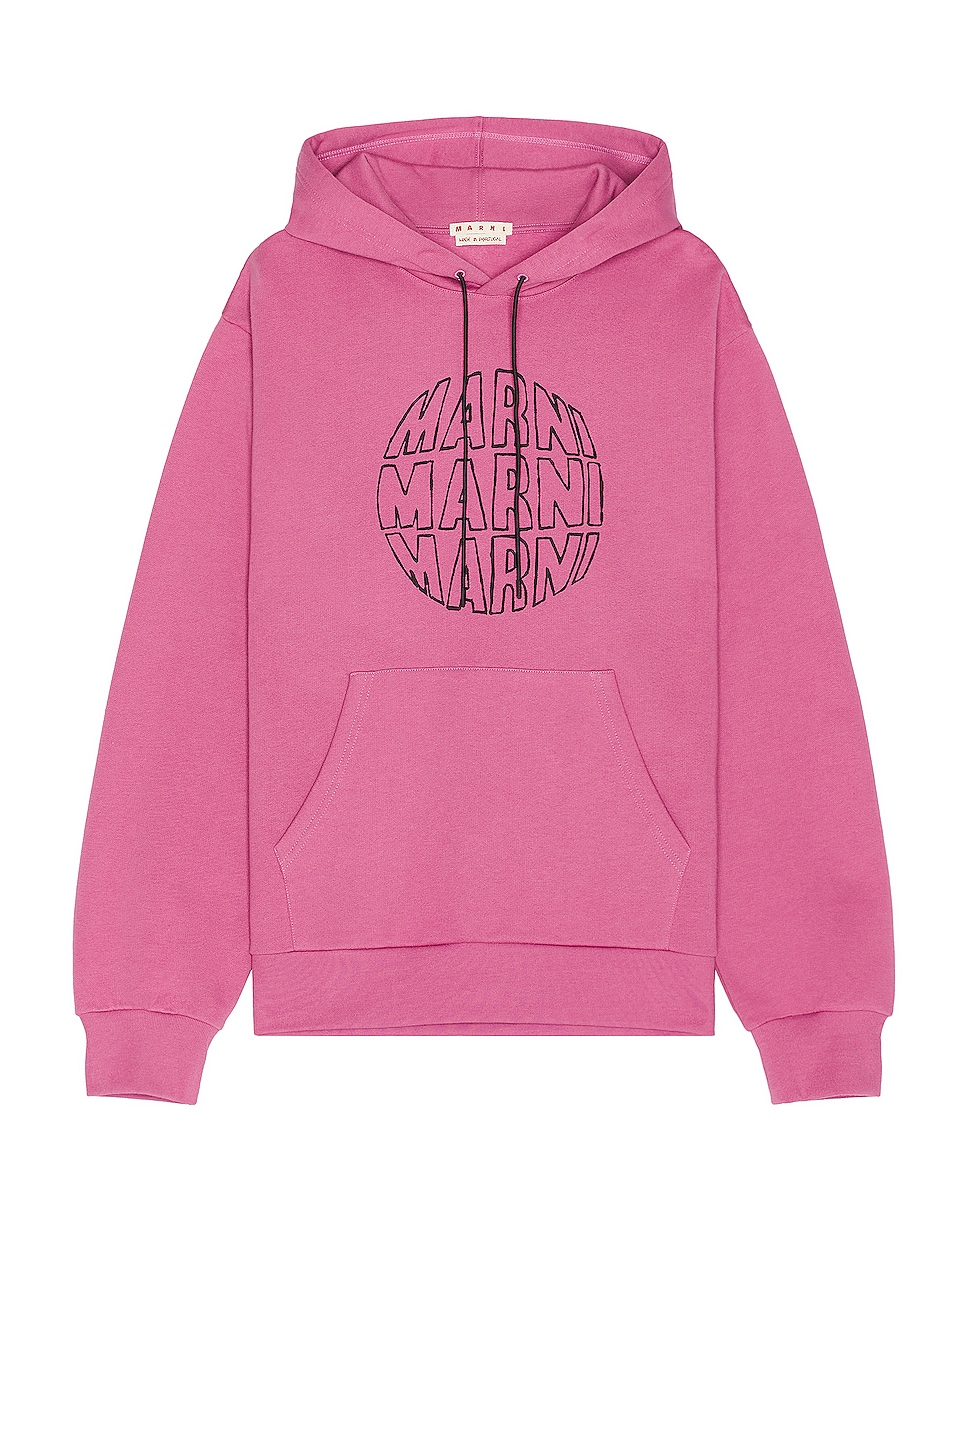 Image 1 of Marni Hoodie in Cassis